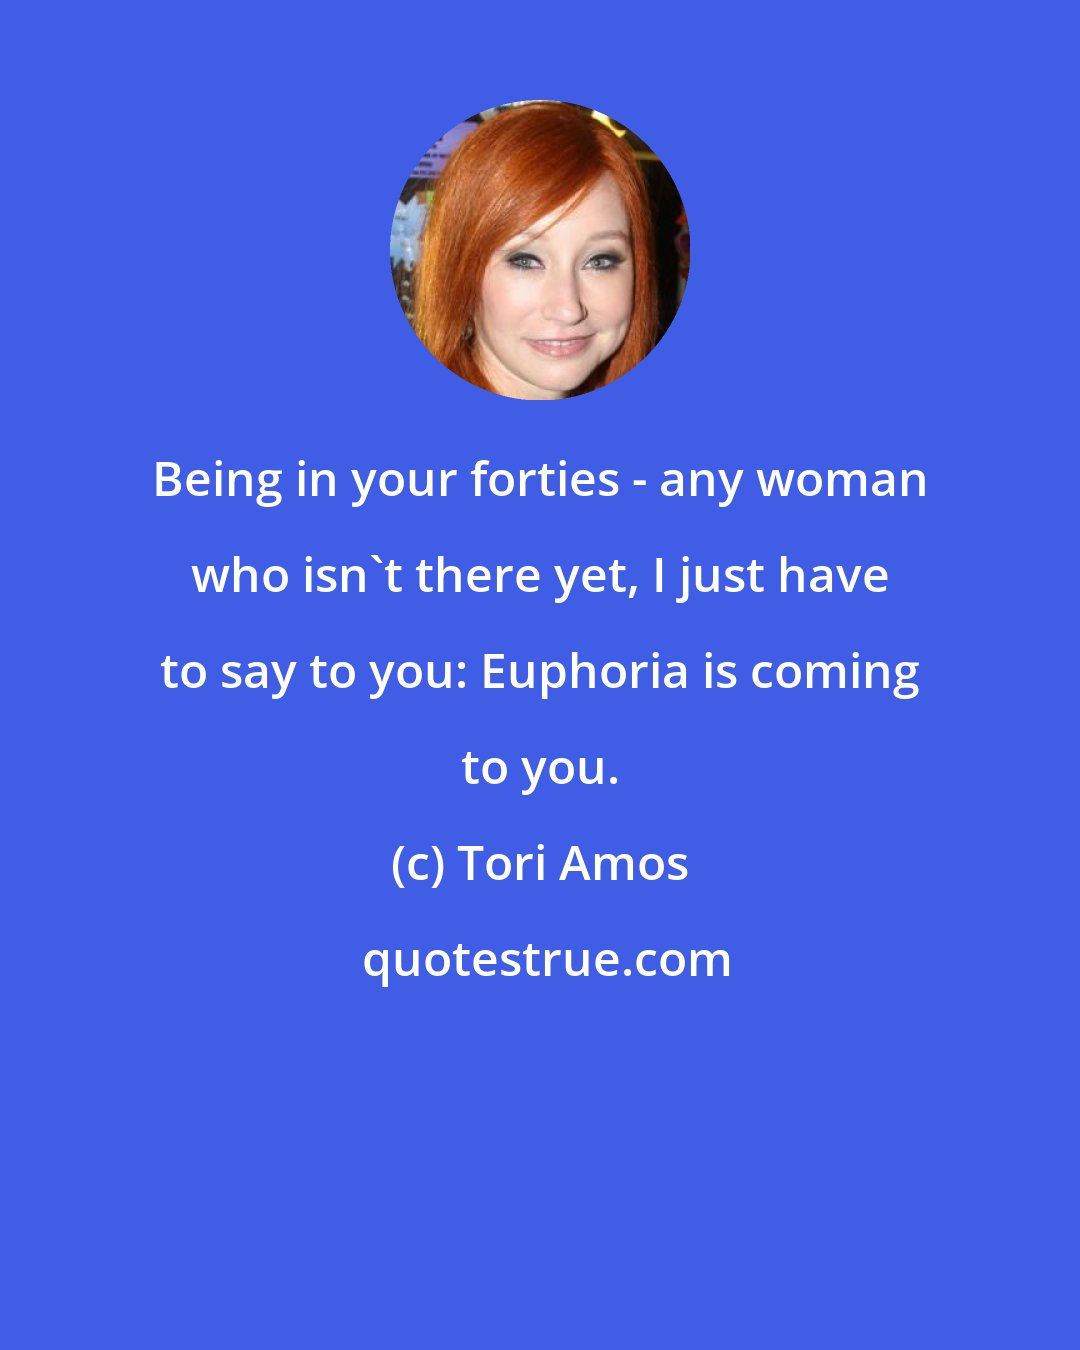 Tori Amos: Being in your forties - any woman who isn't there yet, I just have to say to you: Euphoria is coming to you.